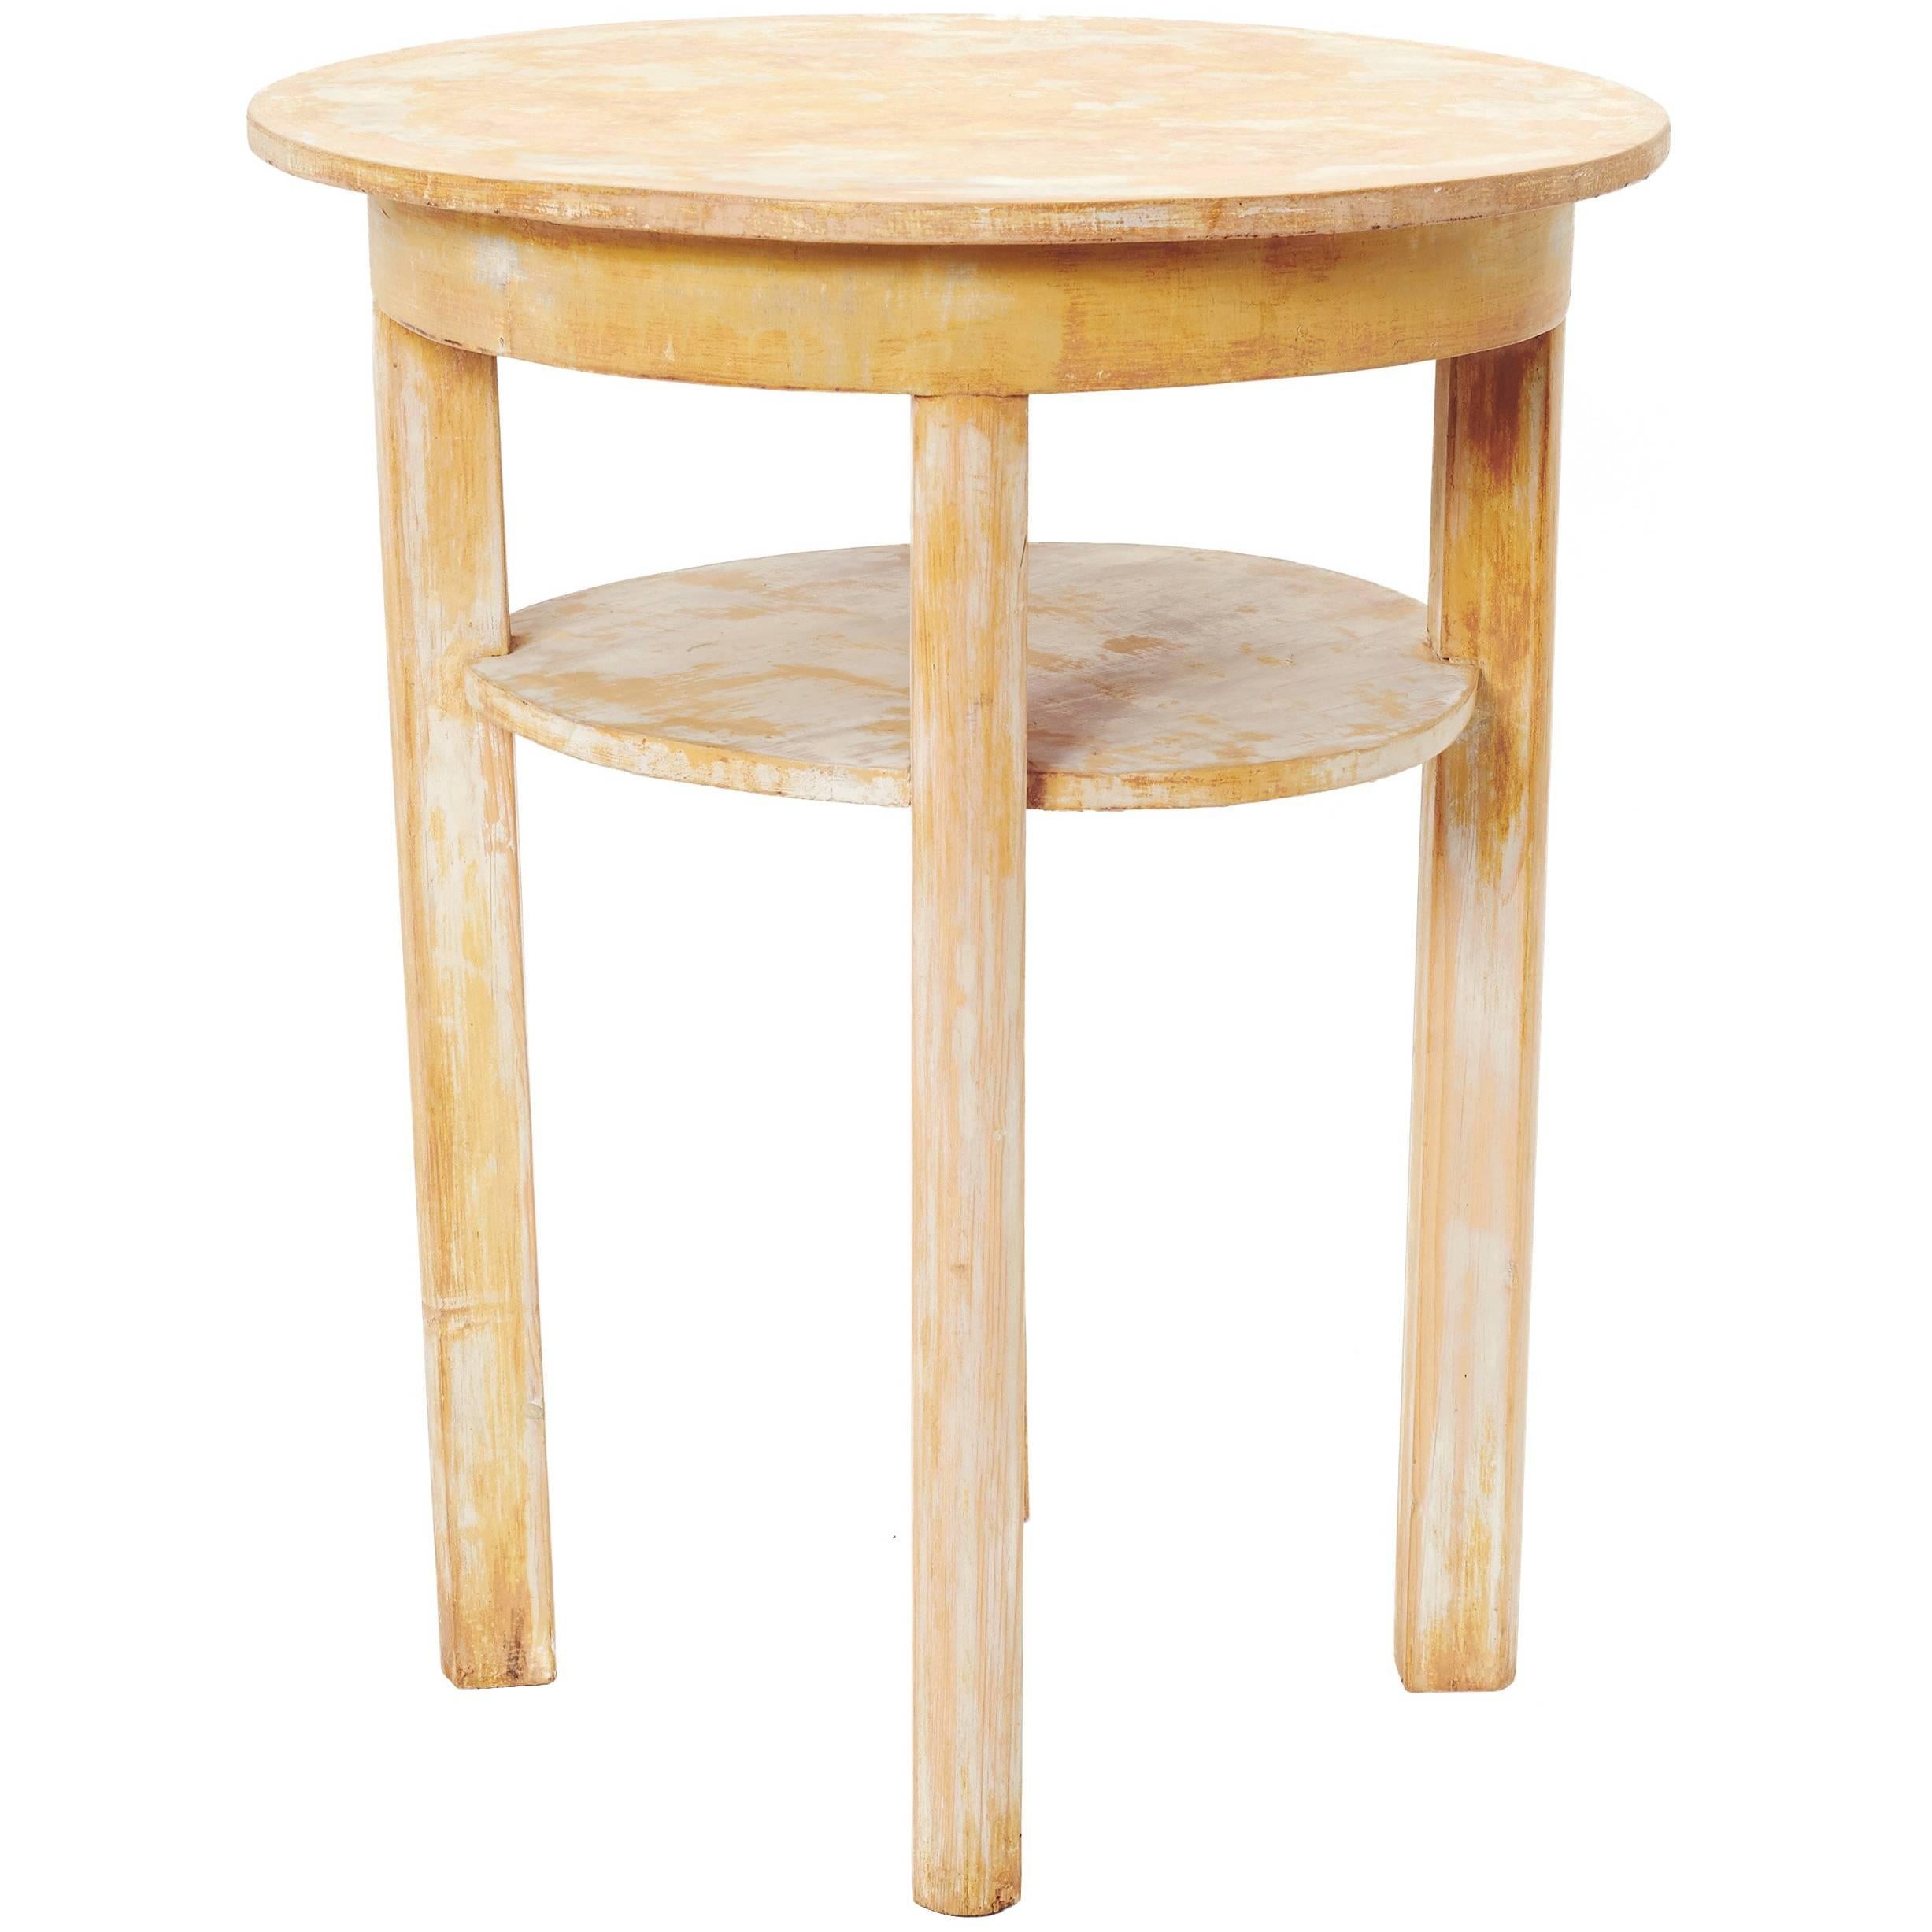 Round Wooden Accent Table For Sale